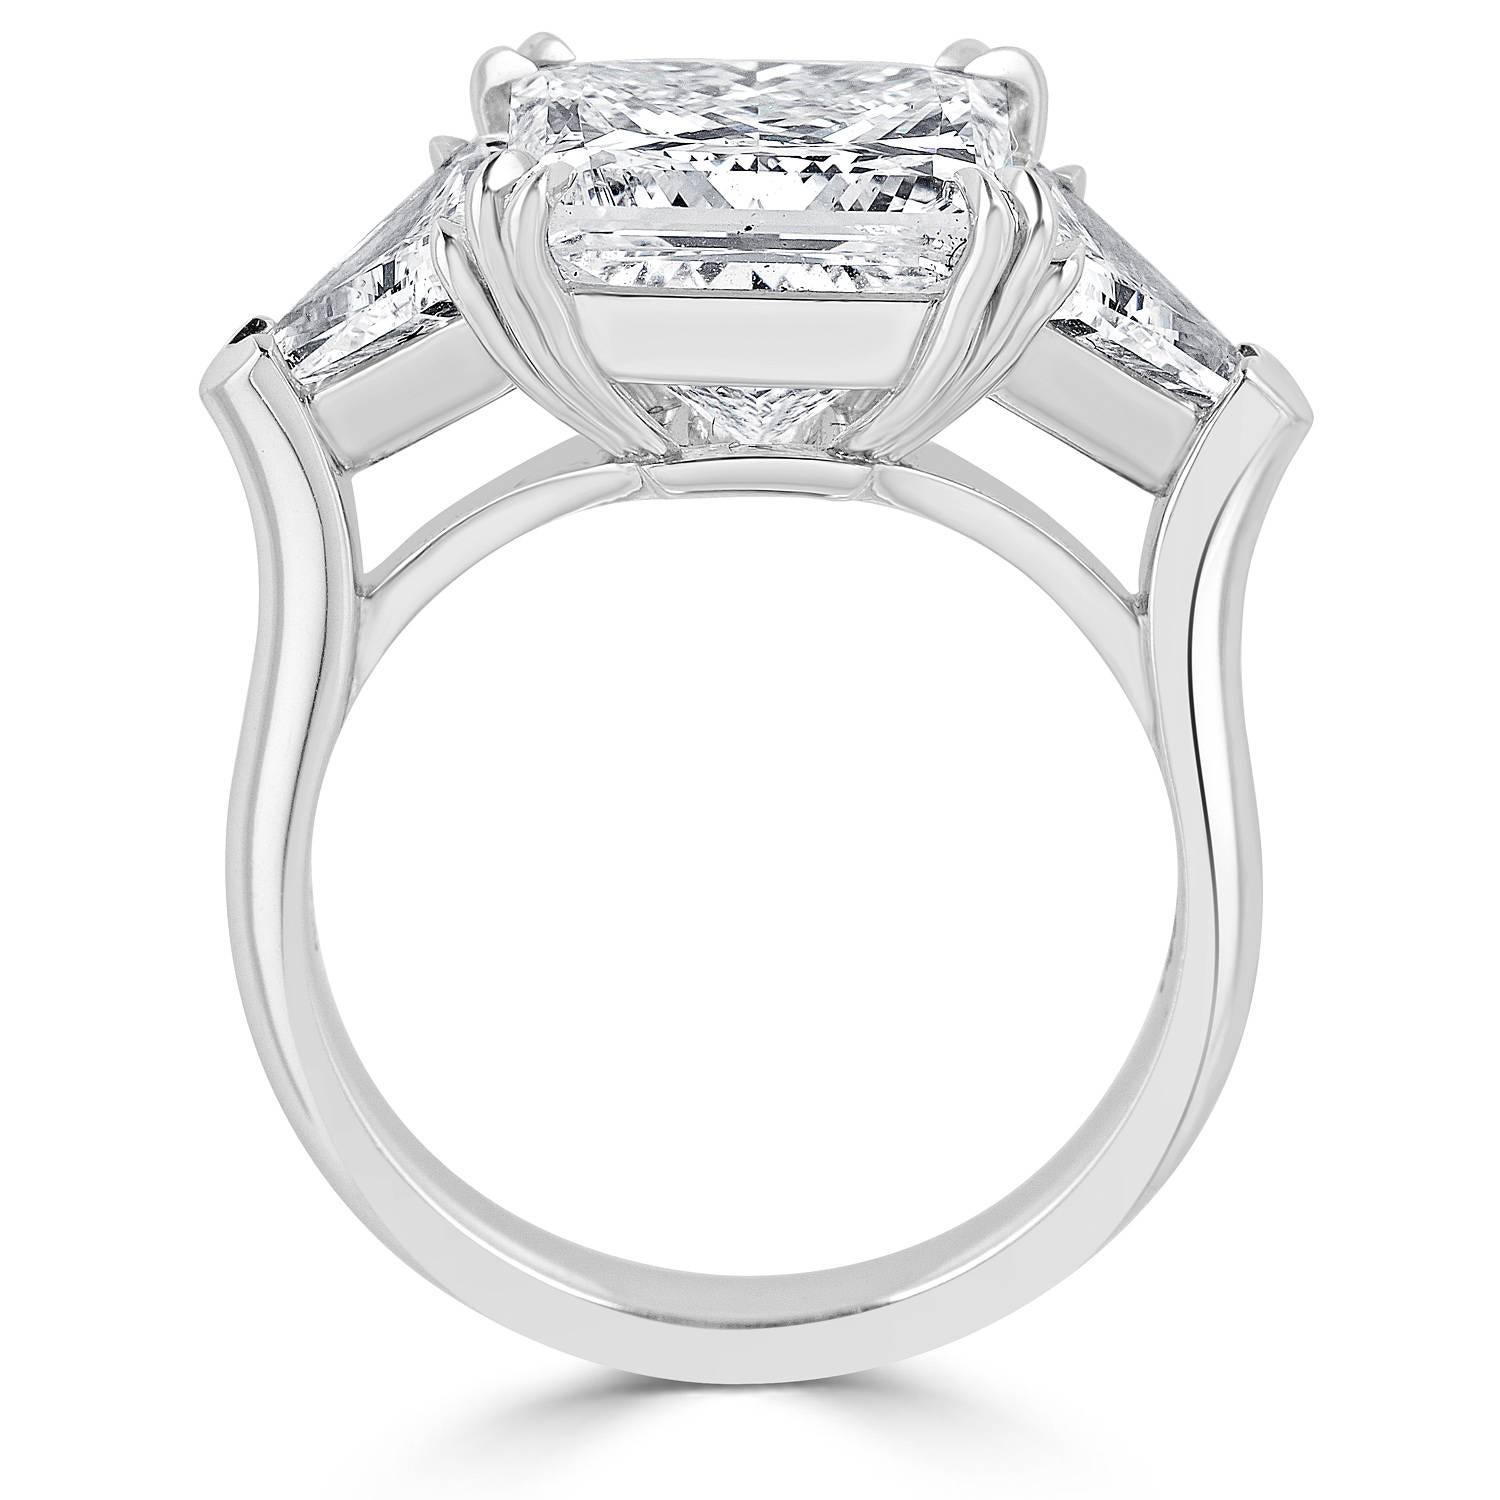 Platinum ring, set in the center with Princess cut Diamond, weigh 5.02 carats D color SI1 clarity, GIA certified, flanked by two Trillion cut Diamonds, total weight 1.20 carats. D color SI clarity.
Ring's total Diamond weight 6.22 carats.